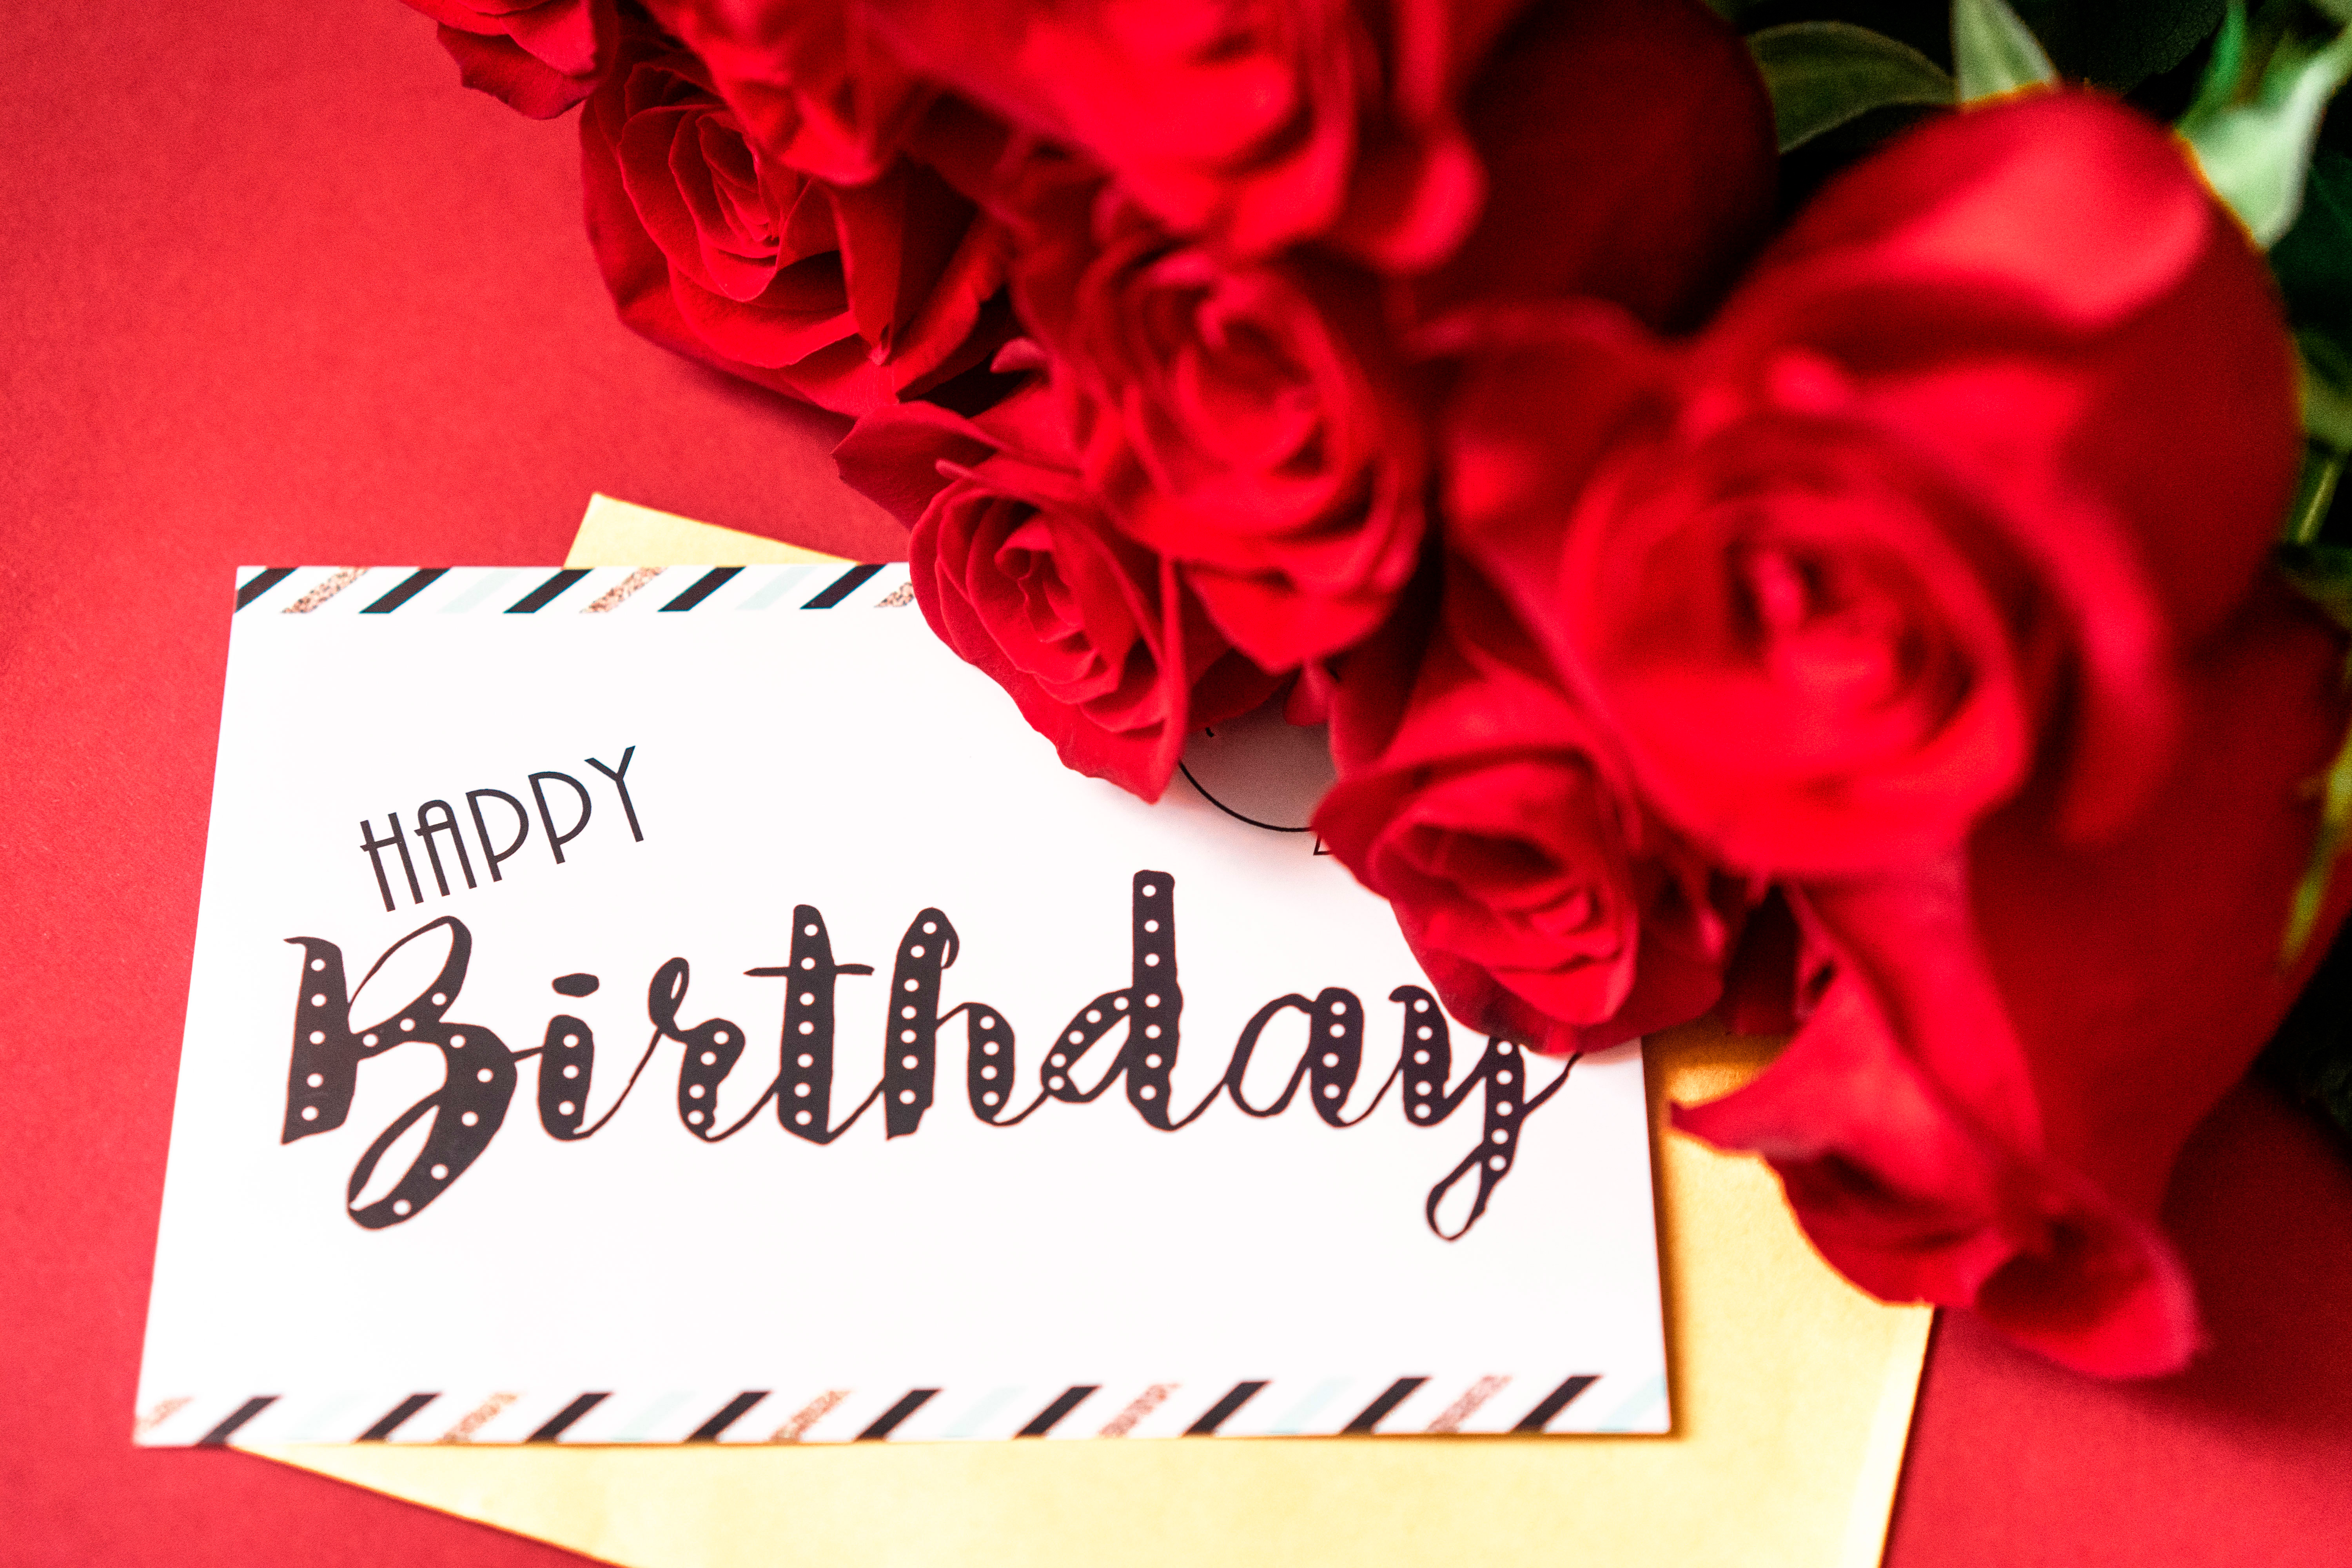 Happy Birthday Flowers on Red Background - Free Stock Photo Download - 765